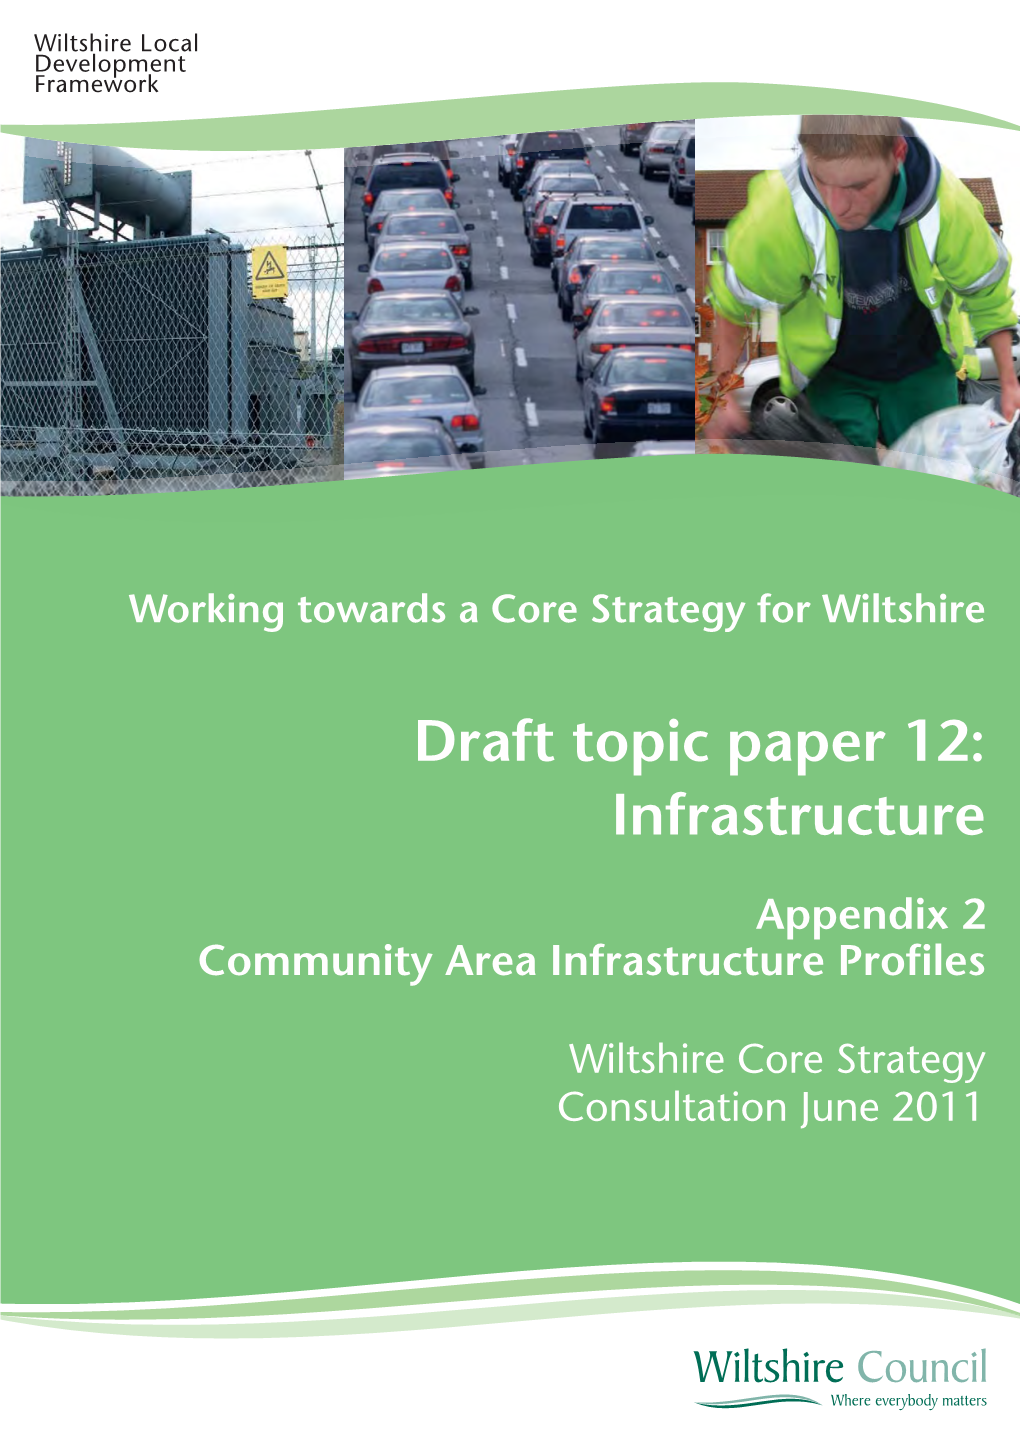 Draft Topic Paper 12: Infrastructure